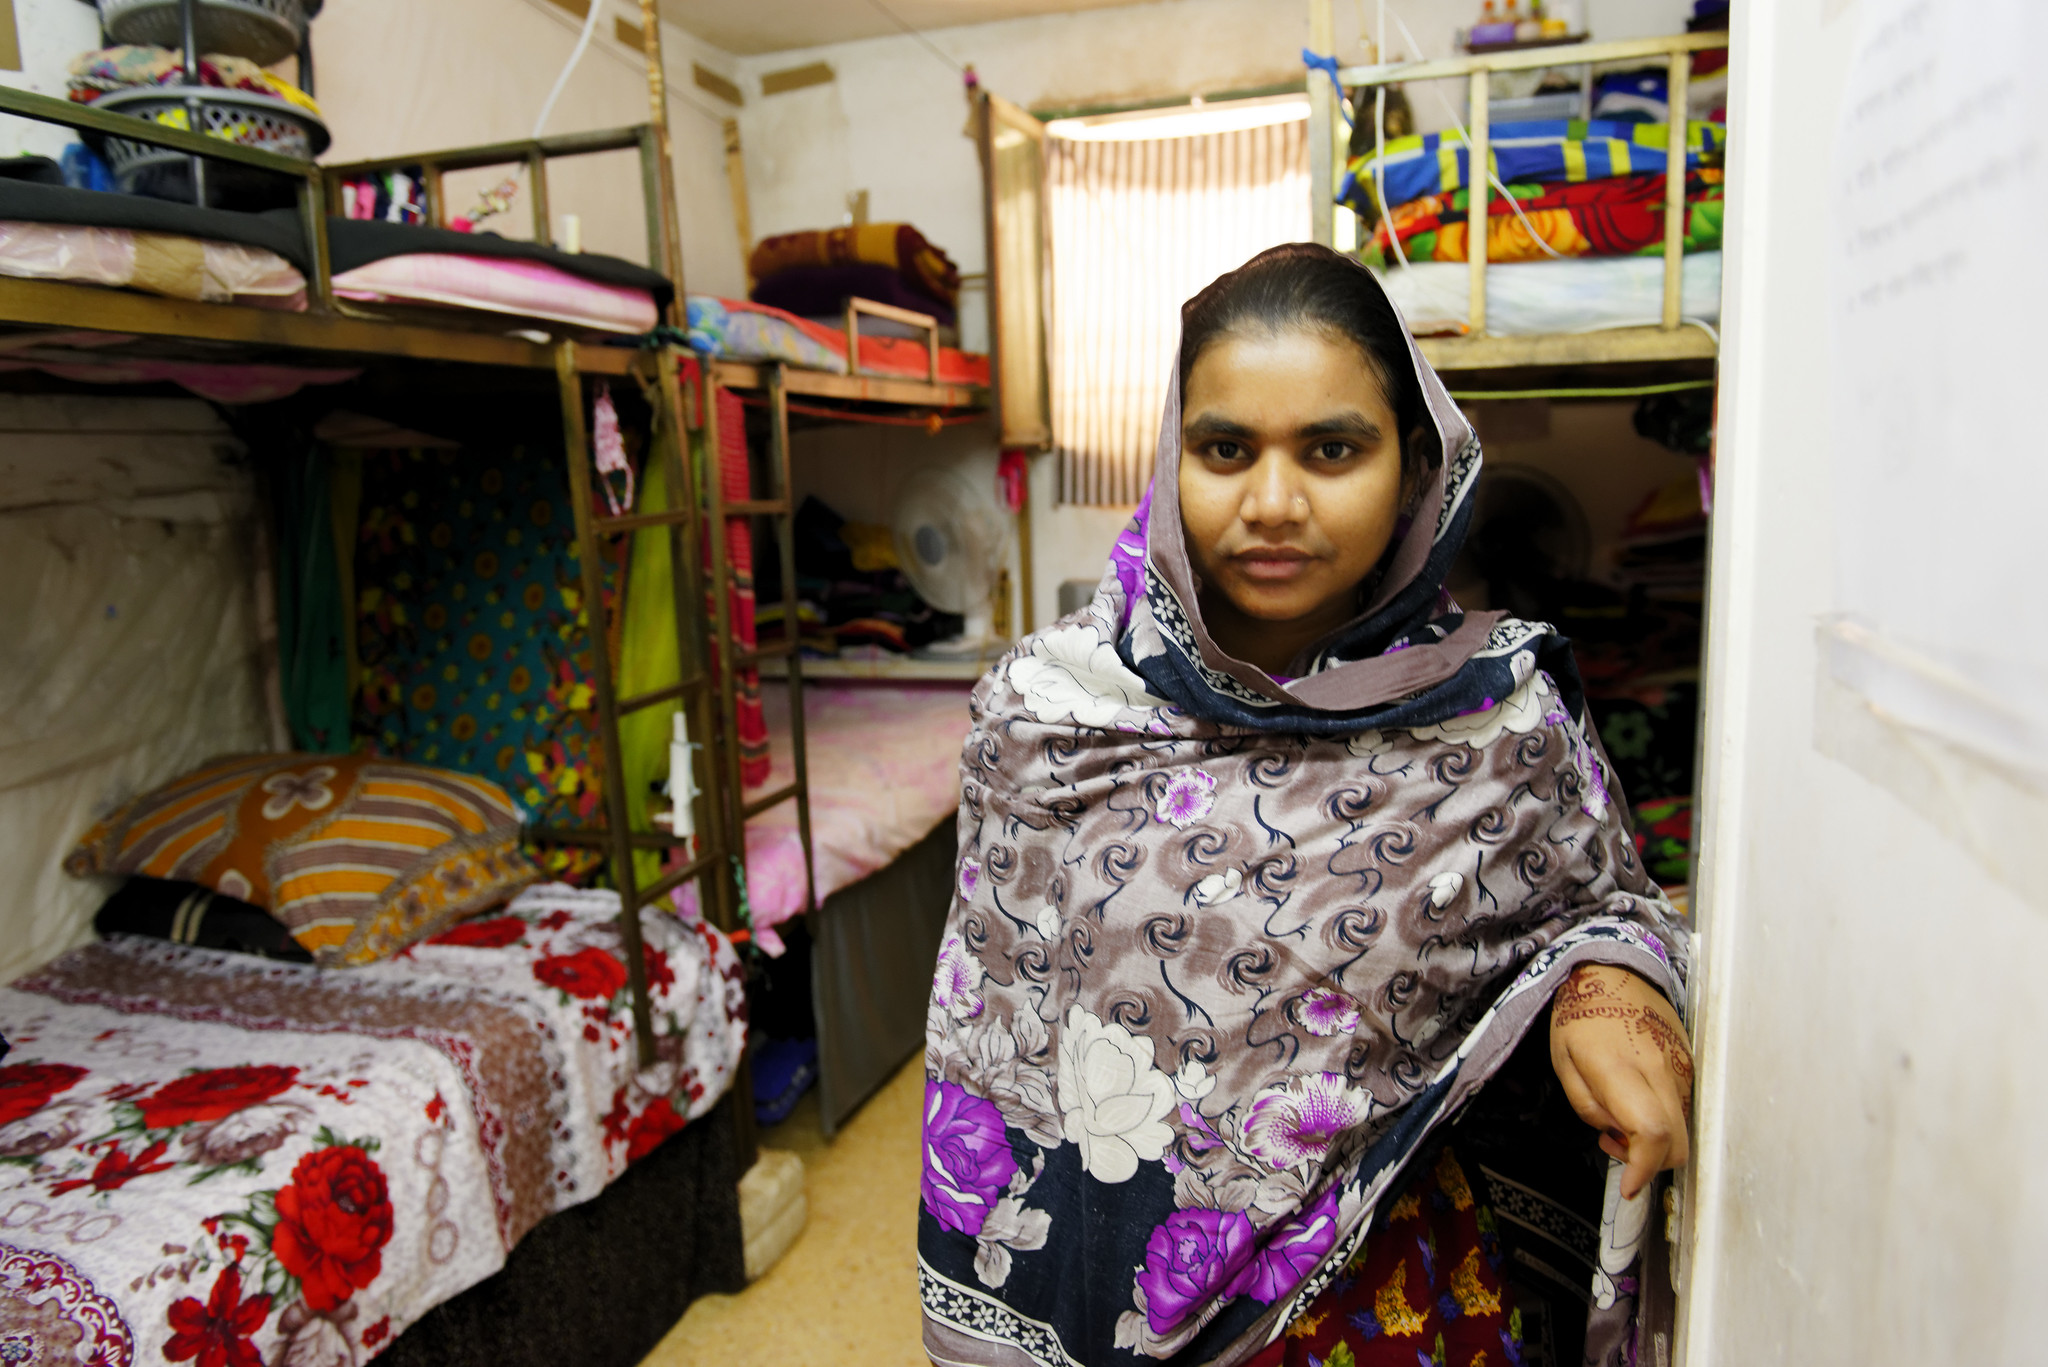 A Bangladeshi garment worker is seen standing in the room she shares with other seven colleagues in a factory dormitory in Jordan